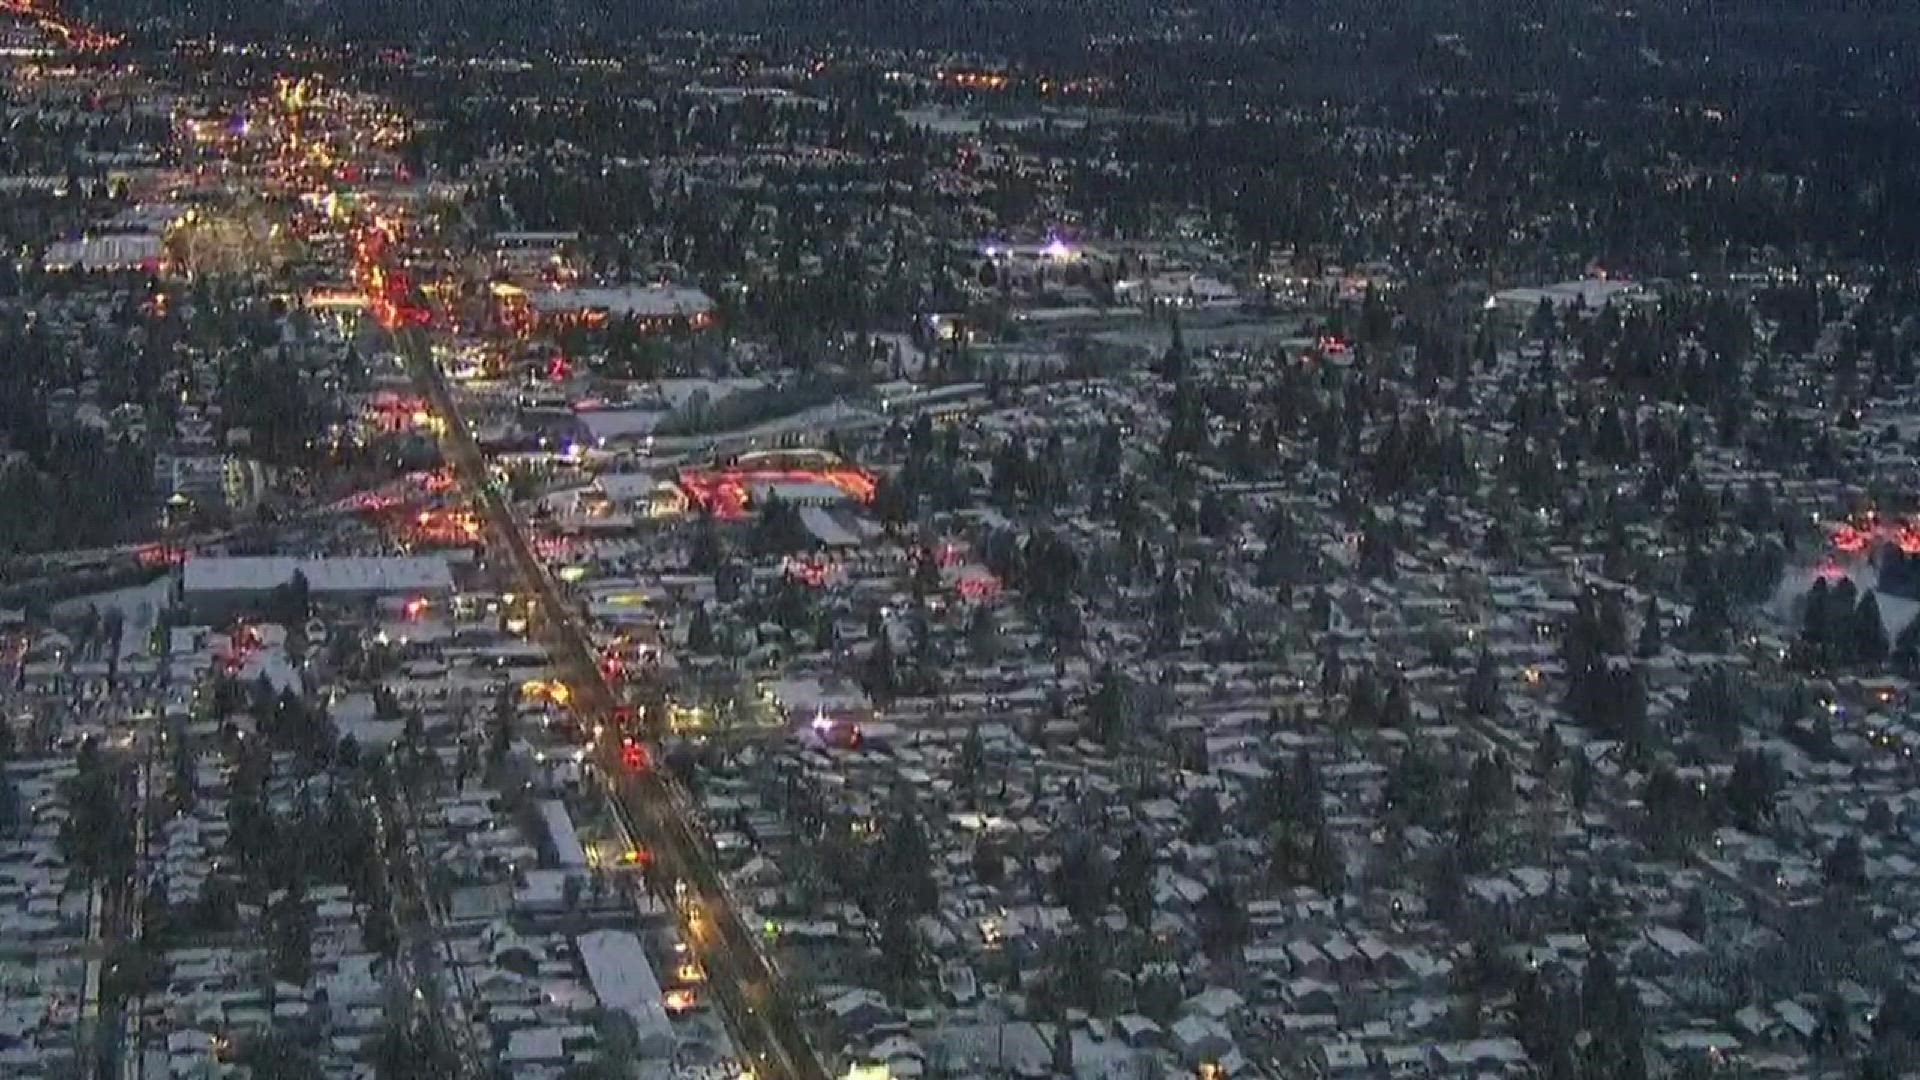 Here's a quick tour of the snow-covered Portland metro area on Monday morning, courtesy of Sky 8